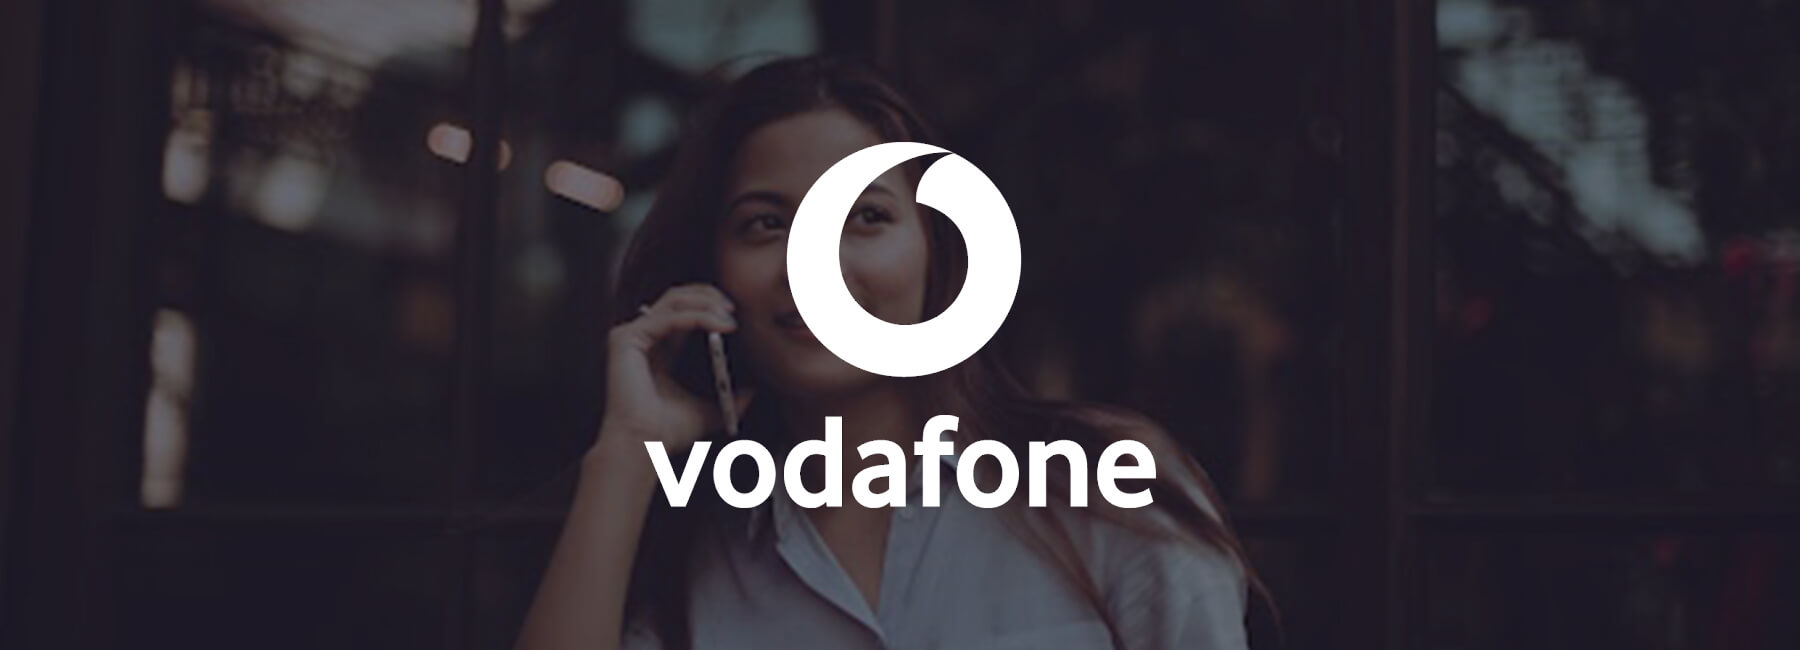 Vodafone Ireland drives customer focused obsession across its digital channels